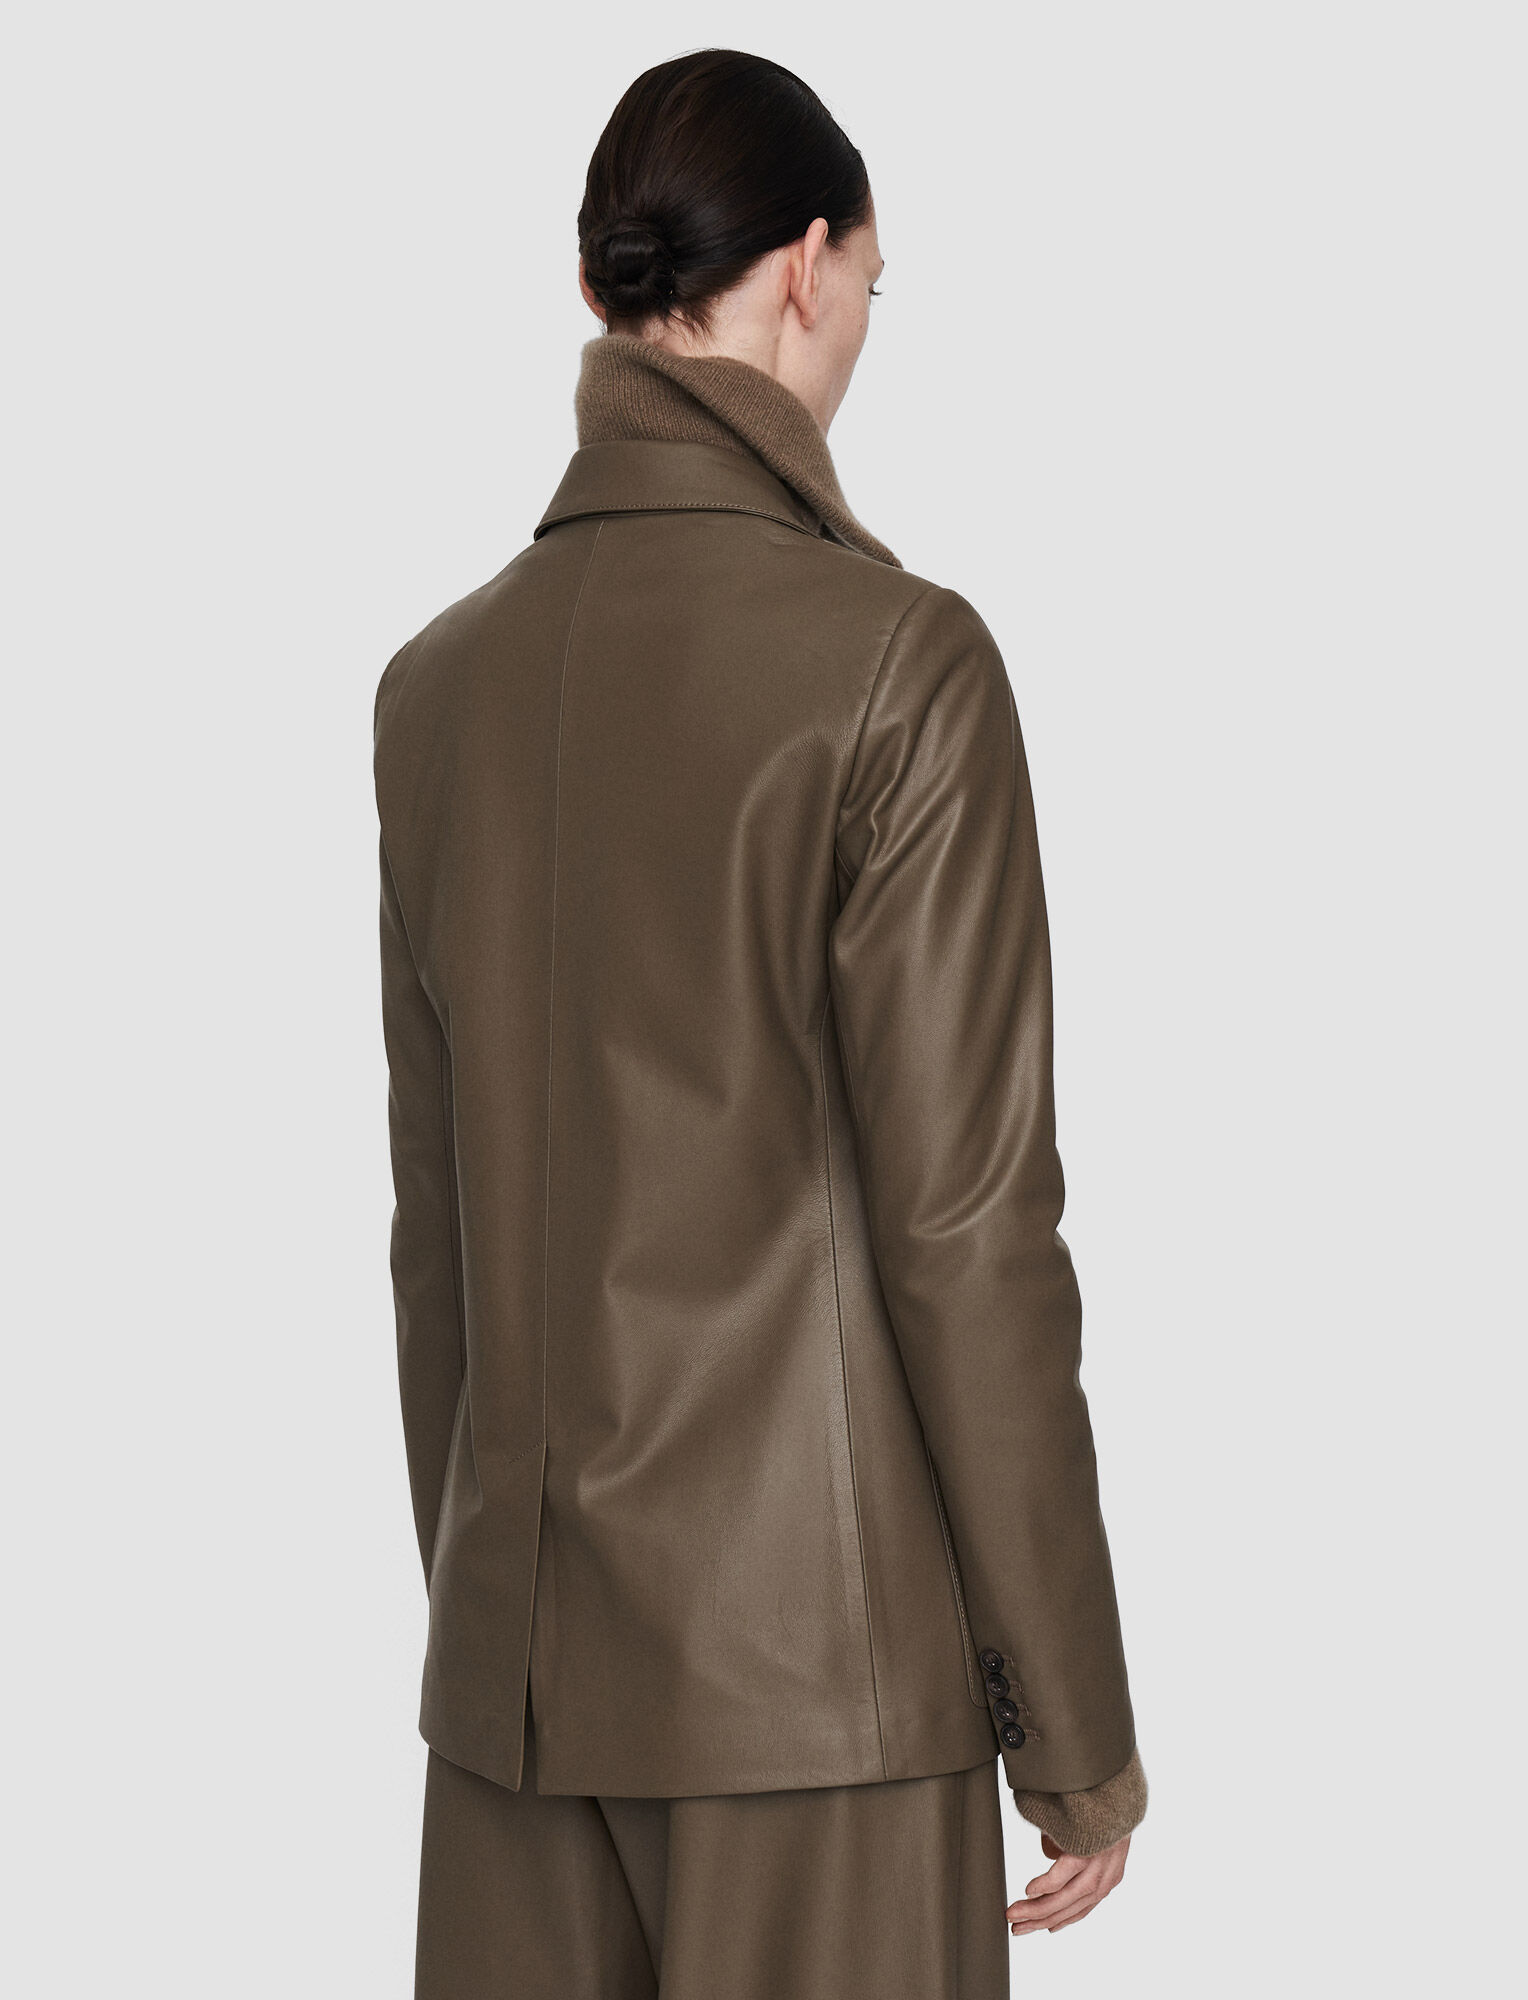 Joseph, Nappa Leather Jacques Jacket, in Hickory